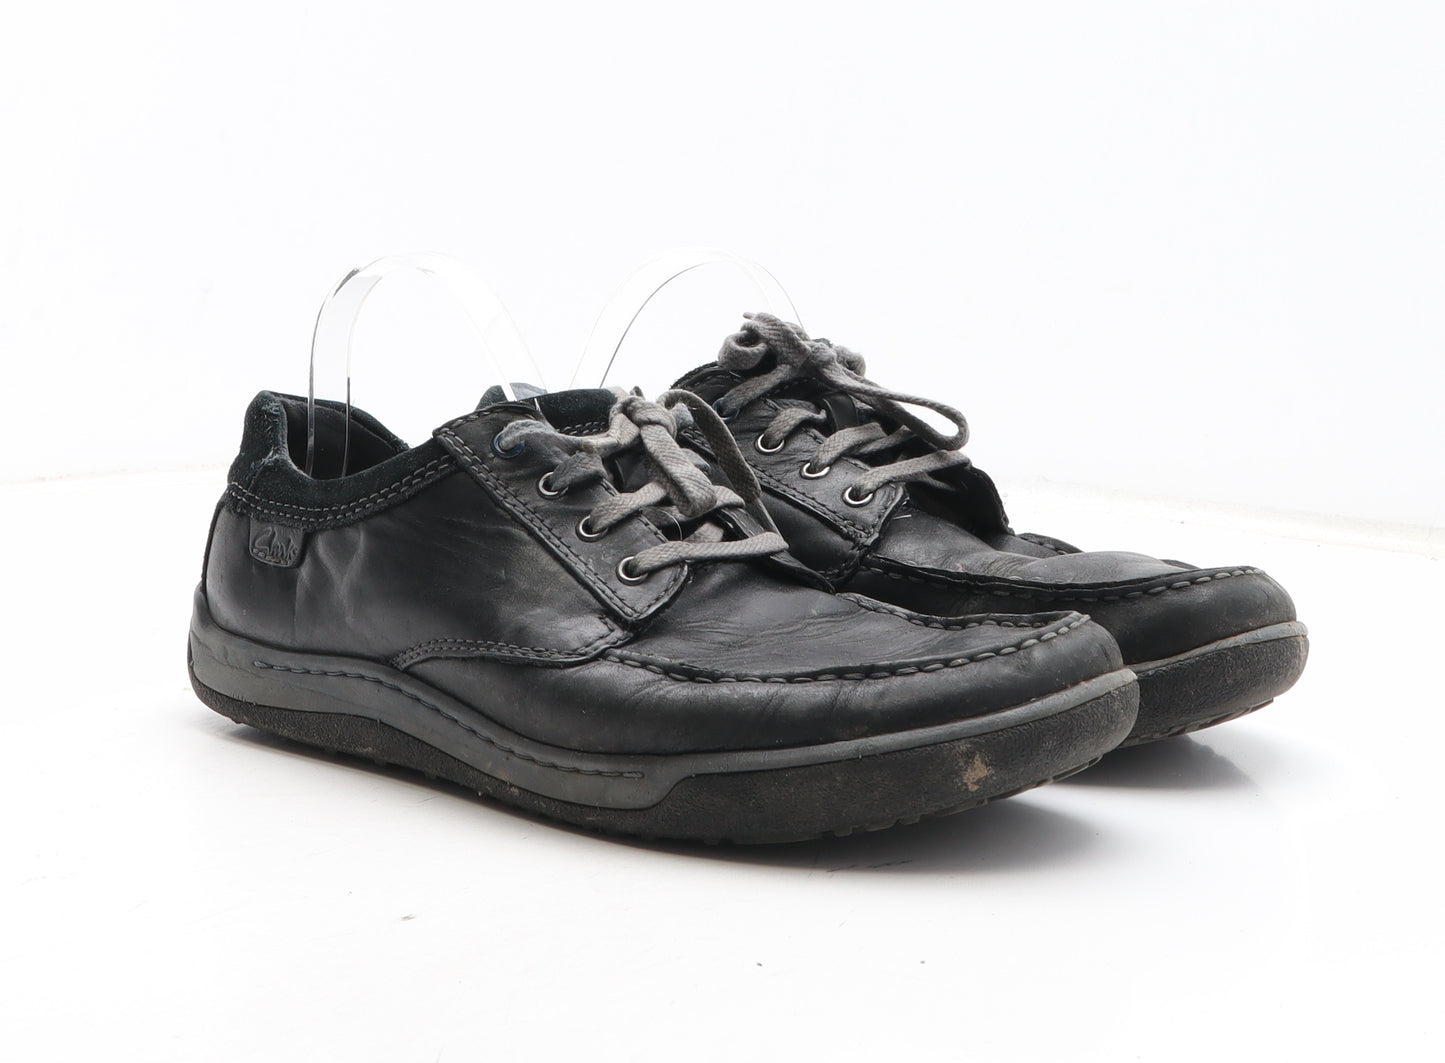 Clarks Mens Black Synthetic Boat Shoe Casual UK 10